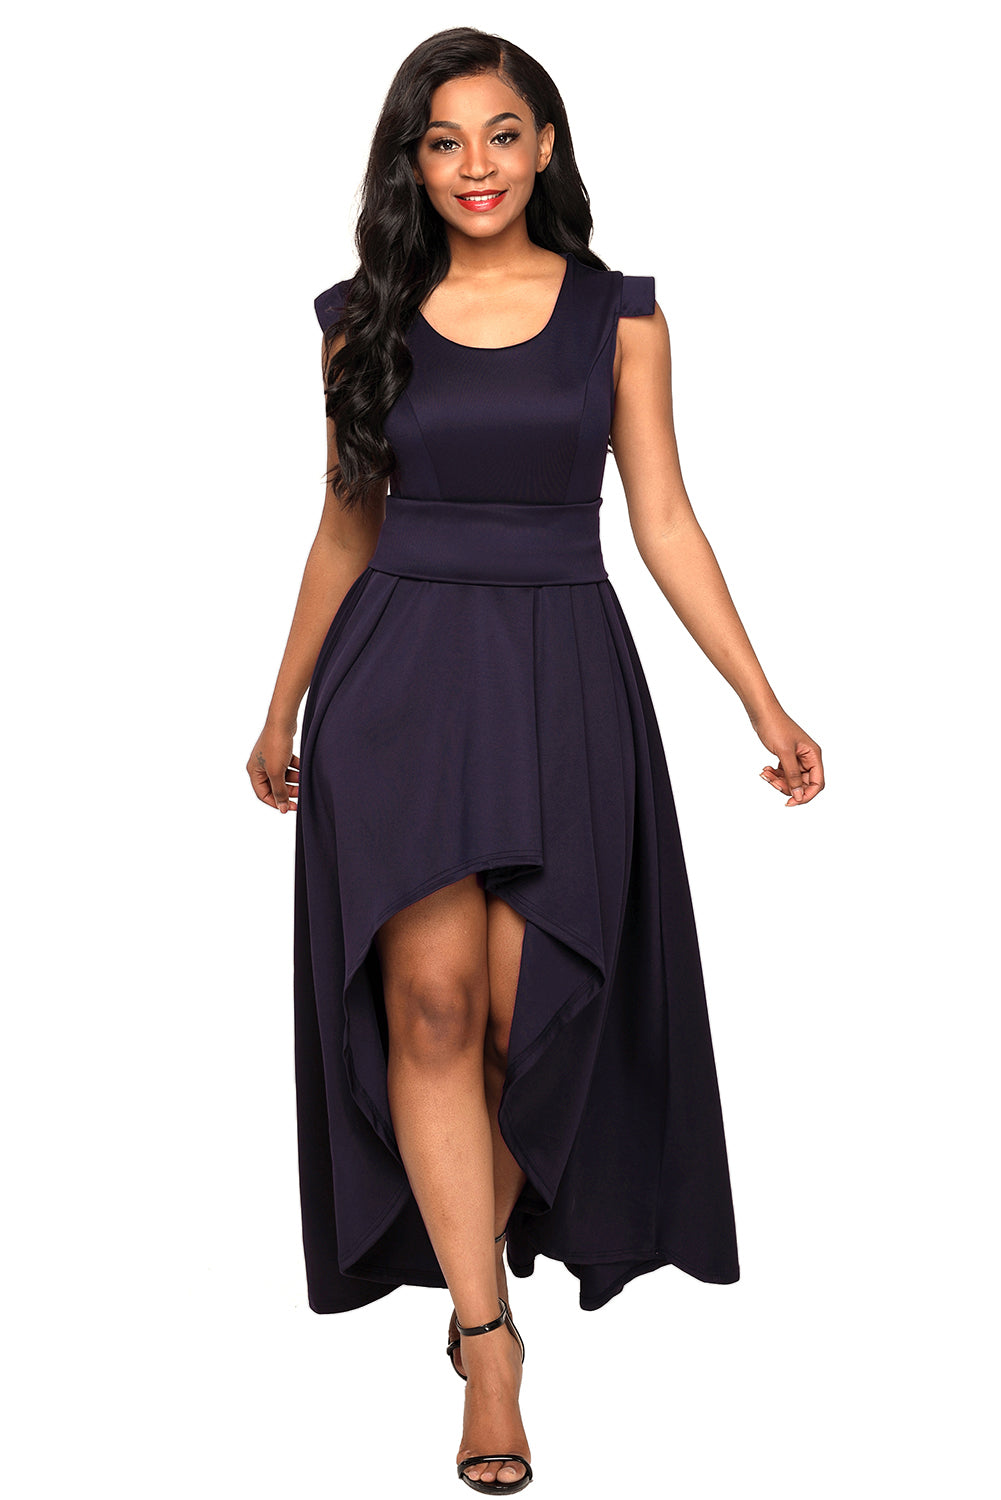 Glamorous Navy Sophisticated Party Queen High Low Her Fashion Dress ...